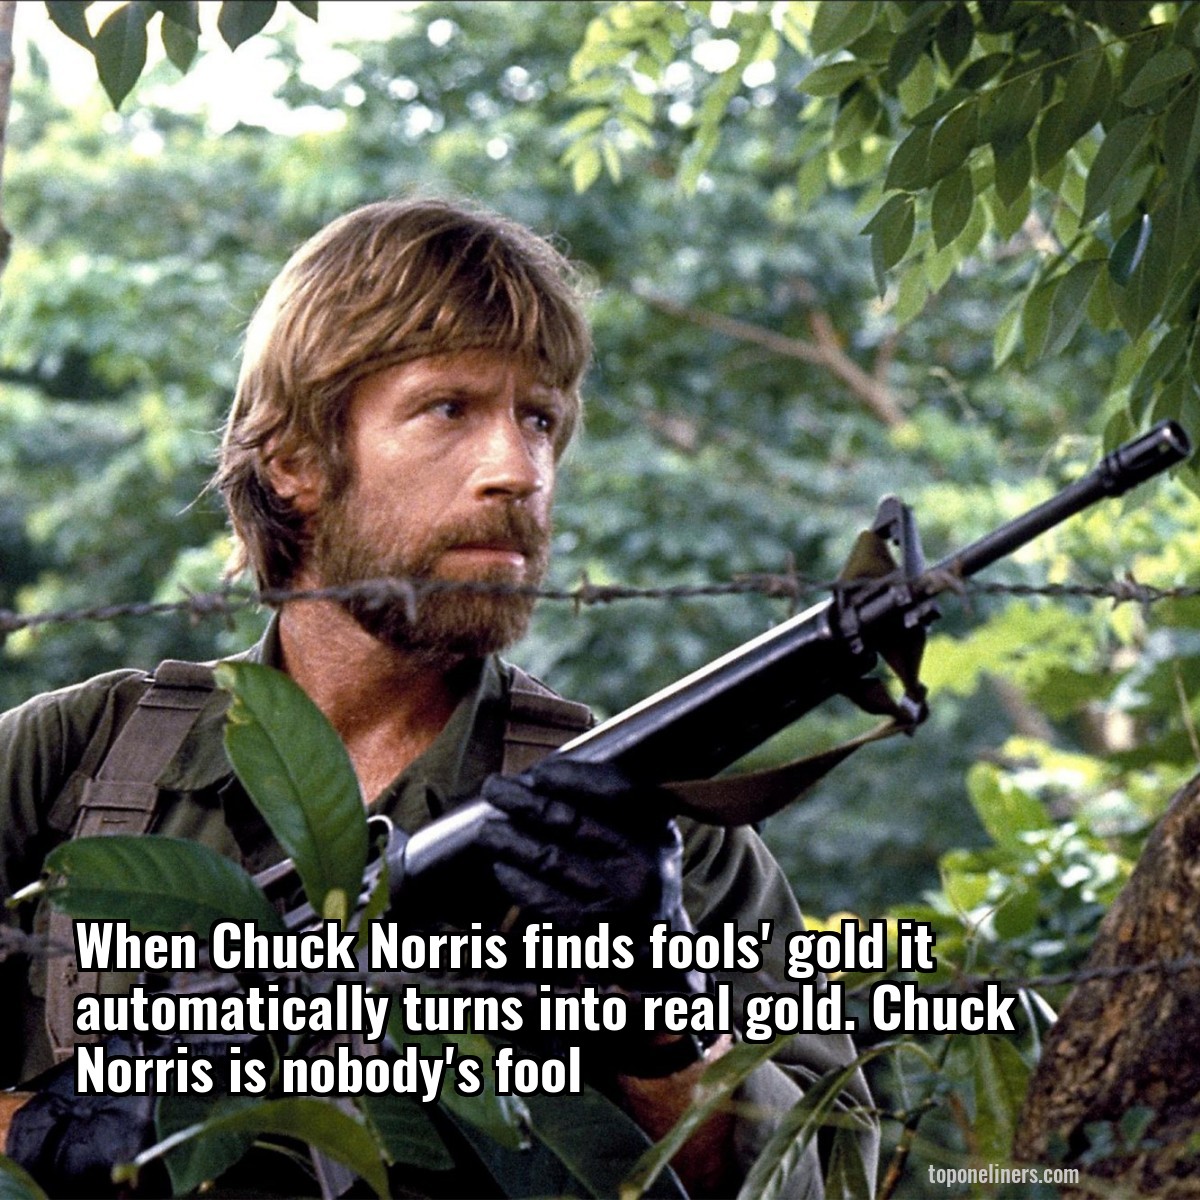 When Chuck Norris finds fools' gold it automatically turns into real gold. Chuck Norris is nobody's fool